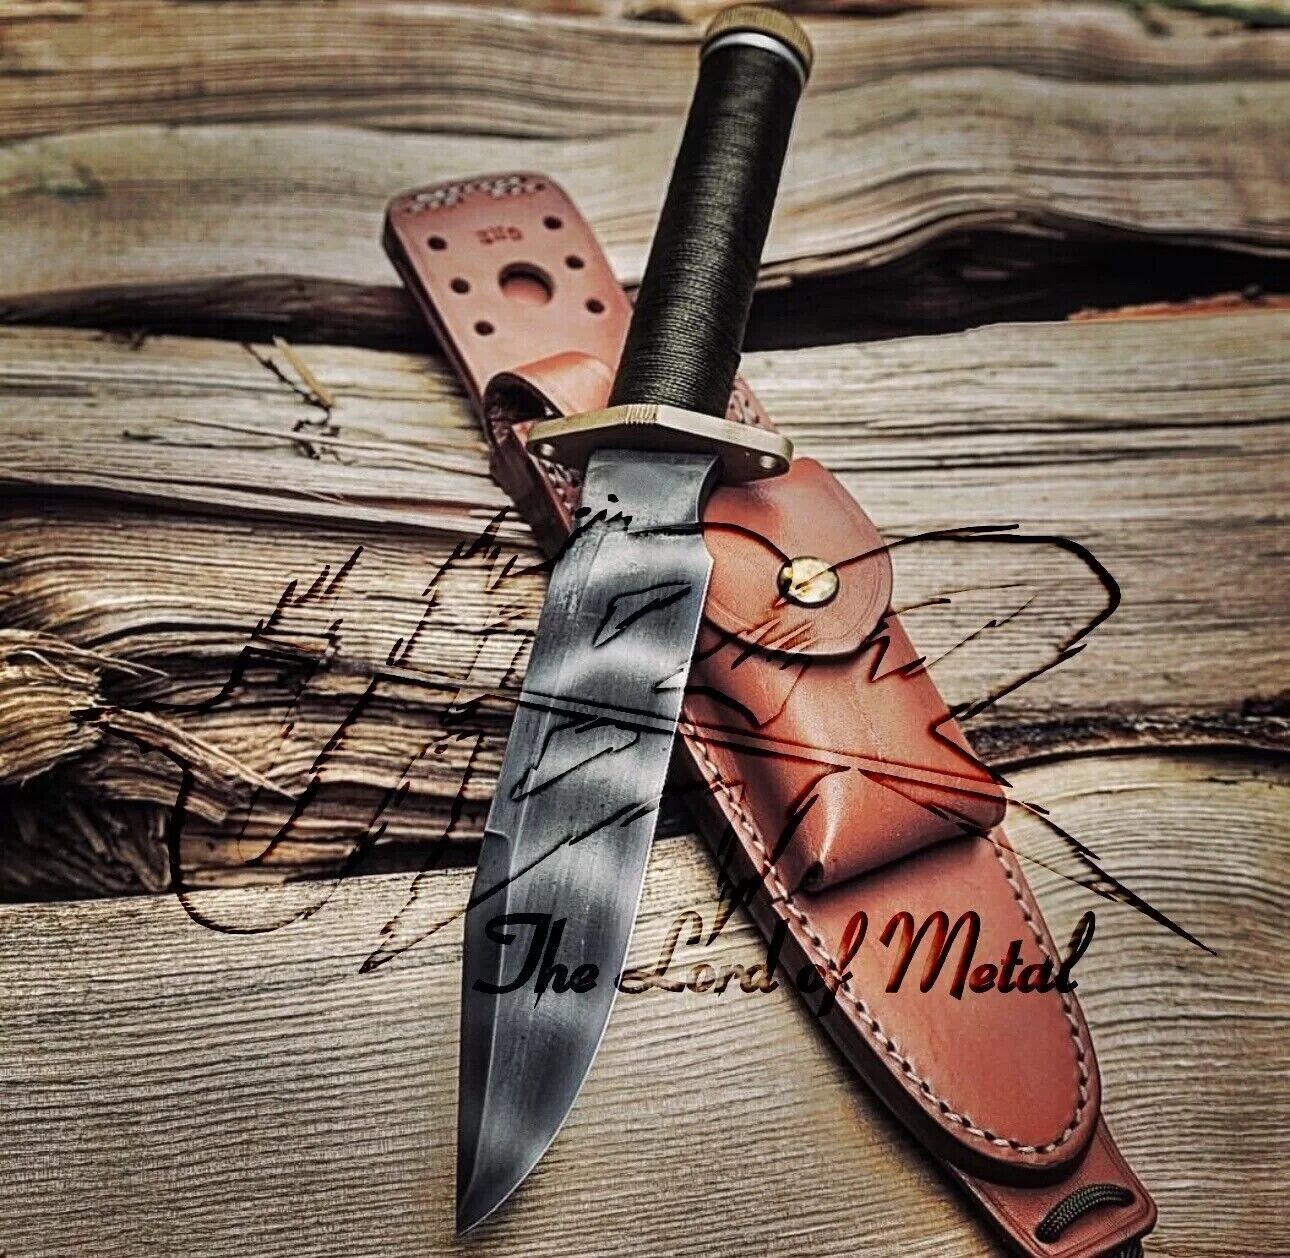 UBR CUSTOM HANDMADE HIGH CARBON STEEL HUNTING BOWIE KNIFE WITH HOLLOW HANDLE